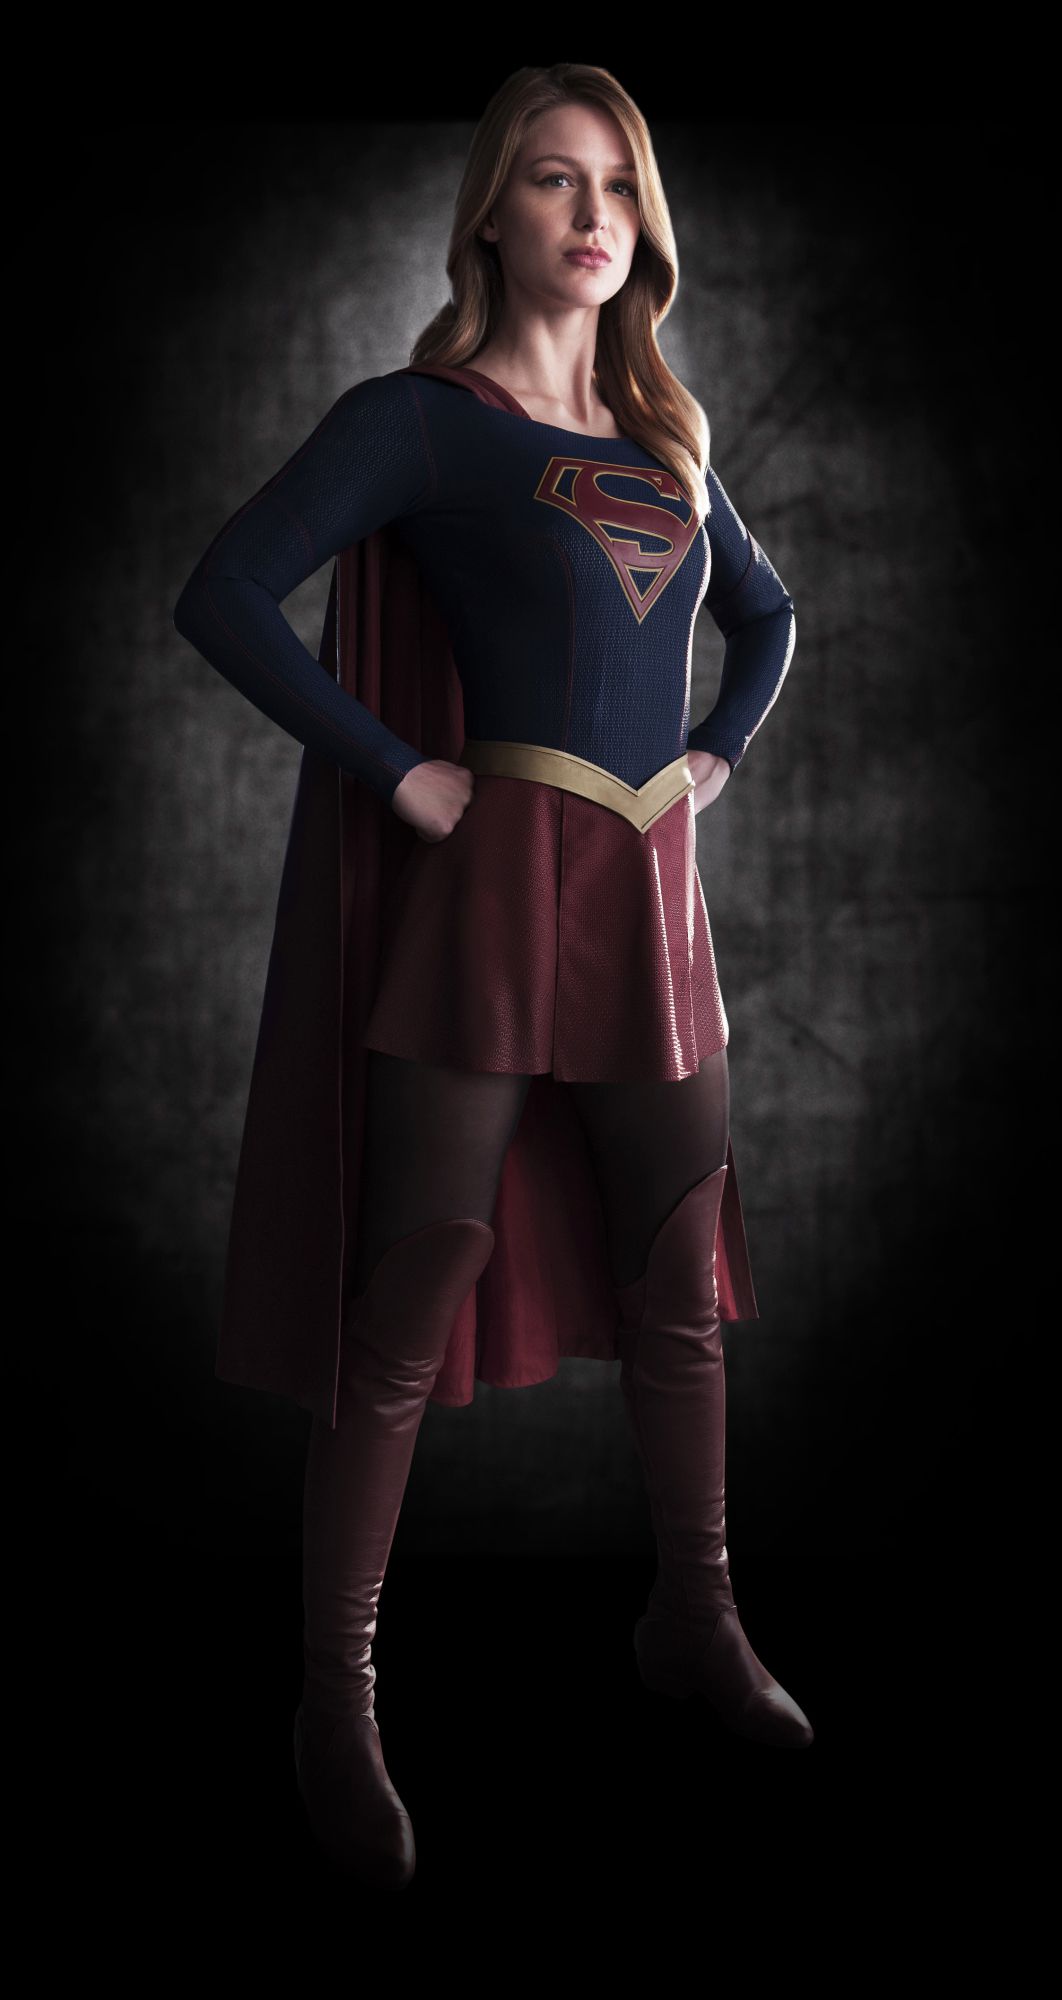 SUPERGIRL, is CBS's new action-adventure drama based on the DC COMICS' character Kara Zor-El (Melissa Benoist), Superman's cousin who, after 12 years of keeping her powers a secret on Earth, decides to finally embrace her superhuman abilities and be th